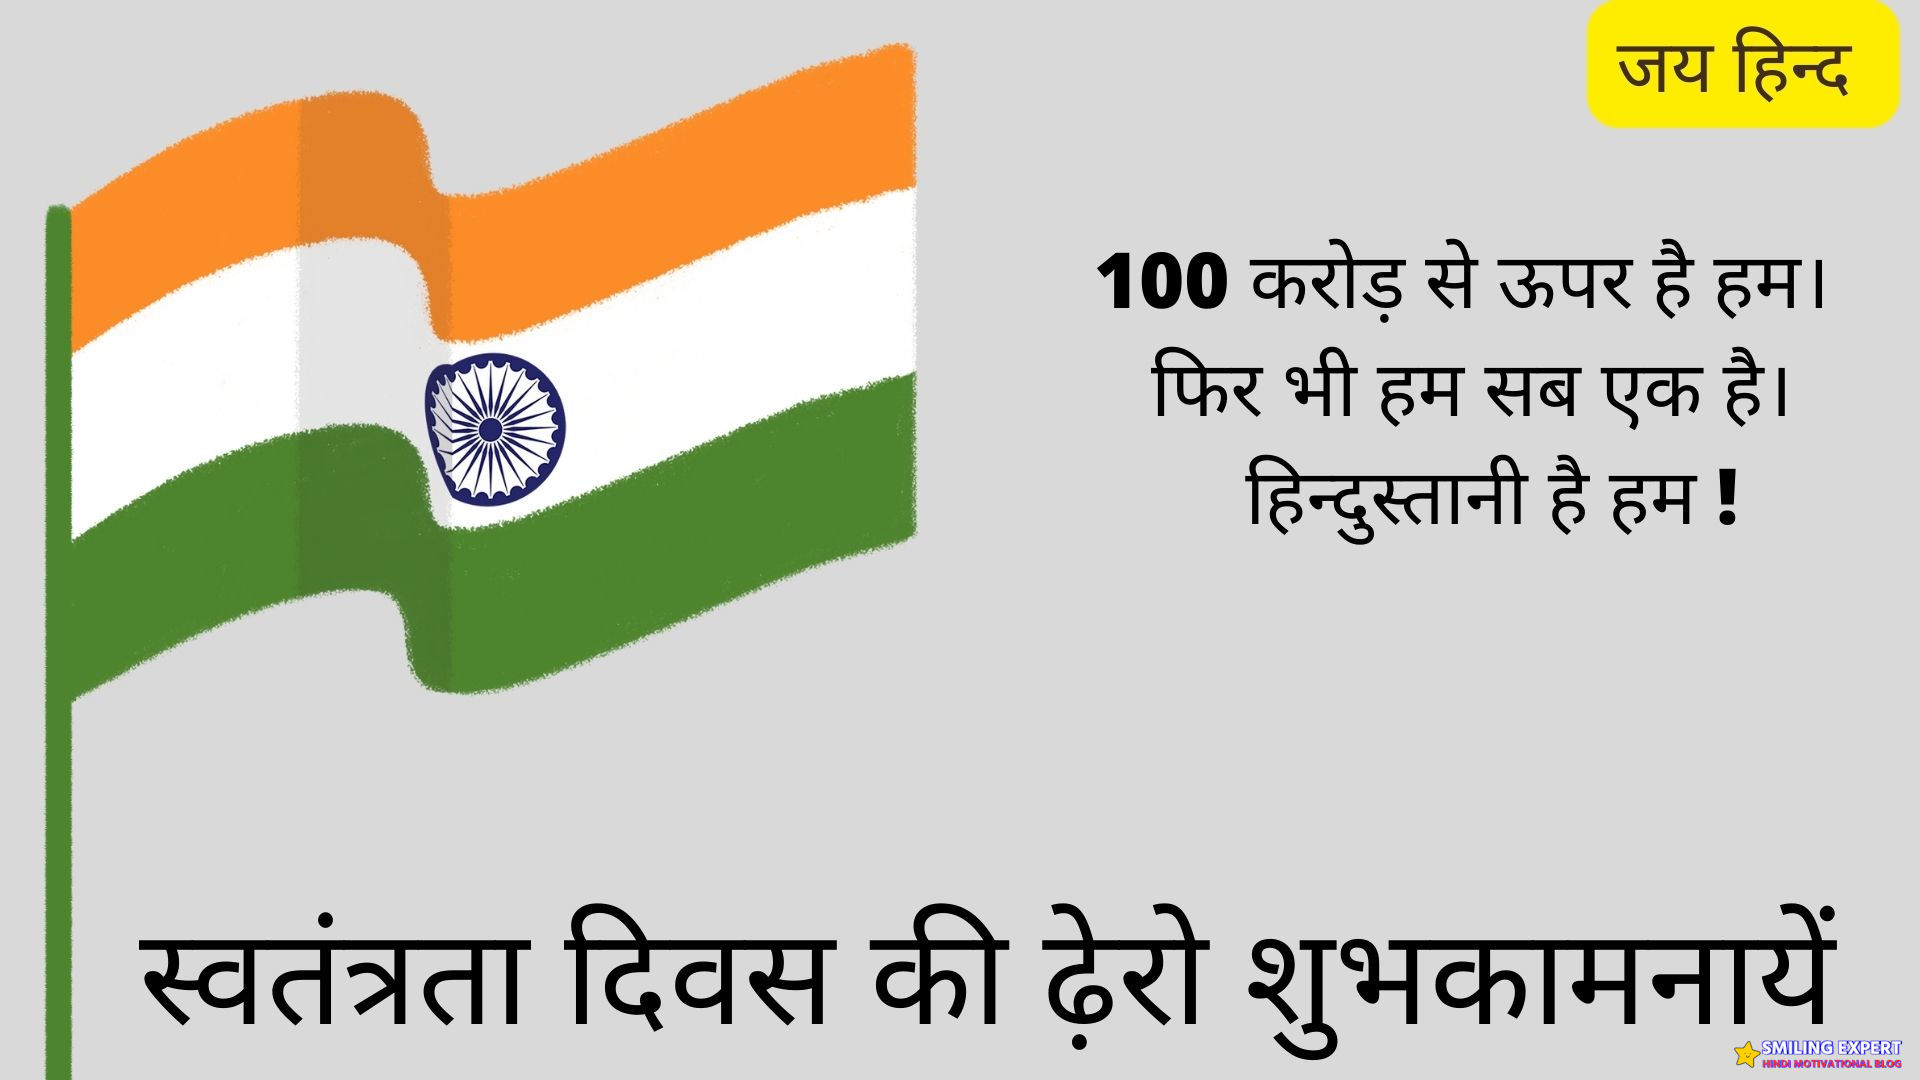 quotes for independence day in hindi